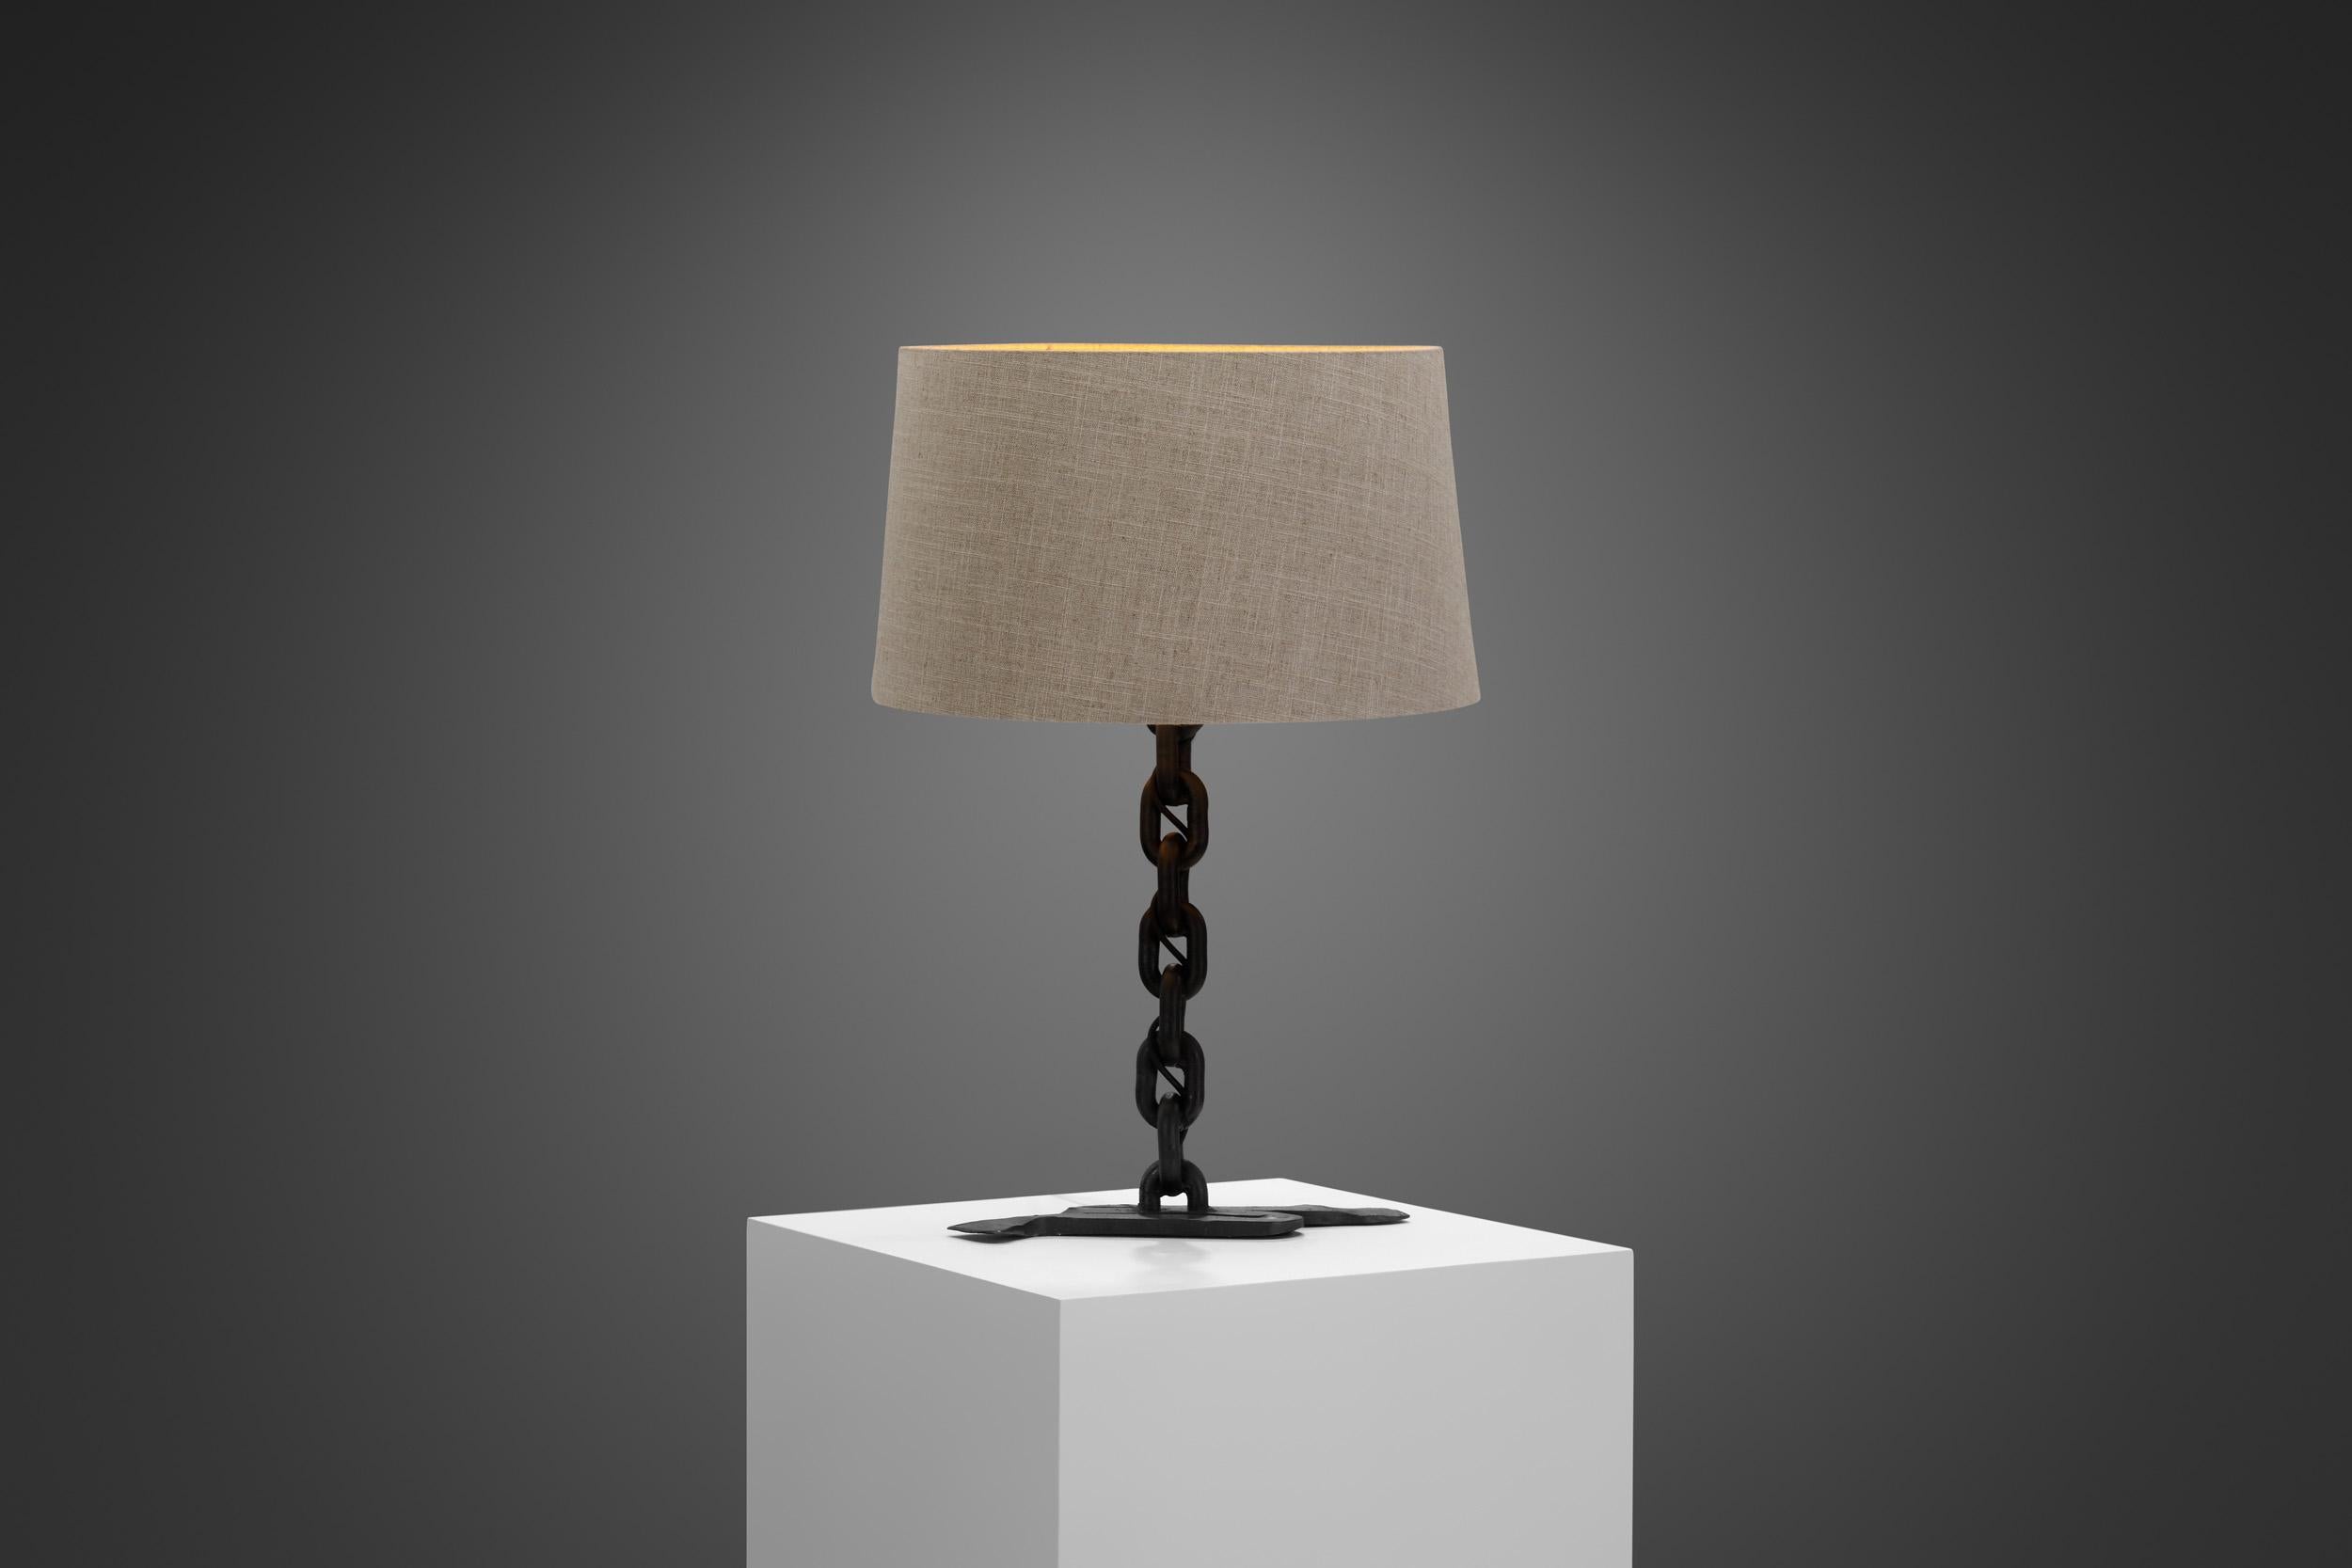 French Wrought Iron Table Lamp with Chain Links, France 1960s For Sale